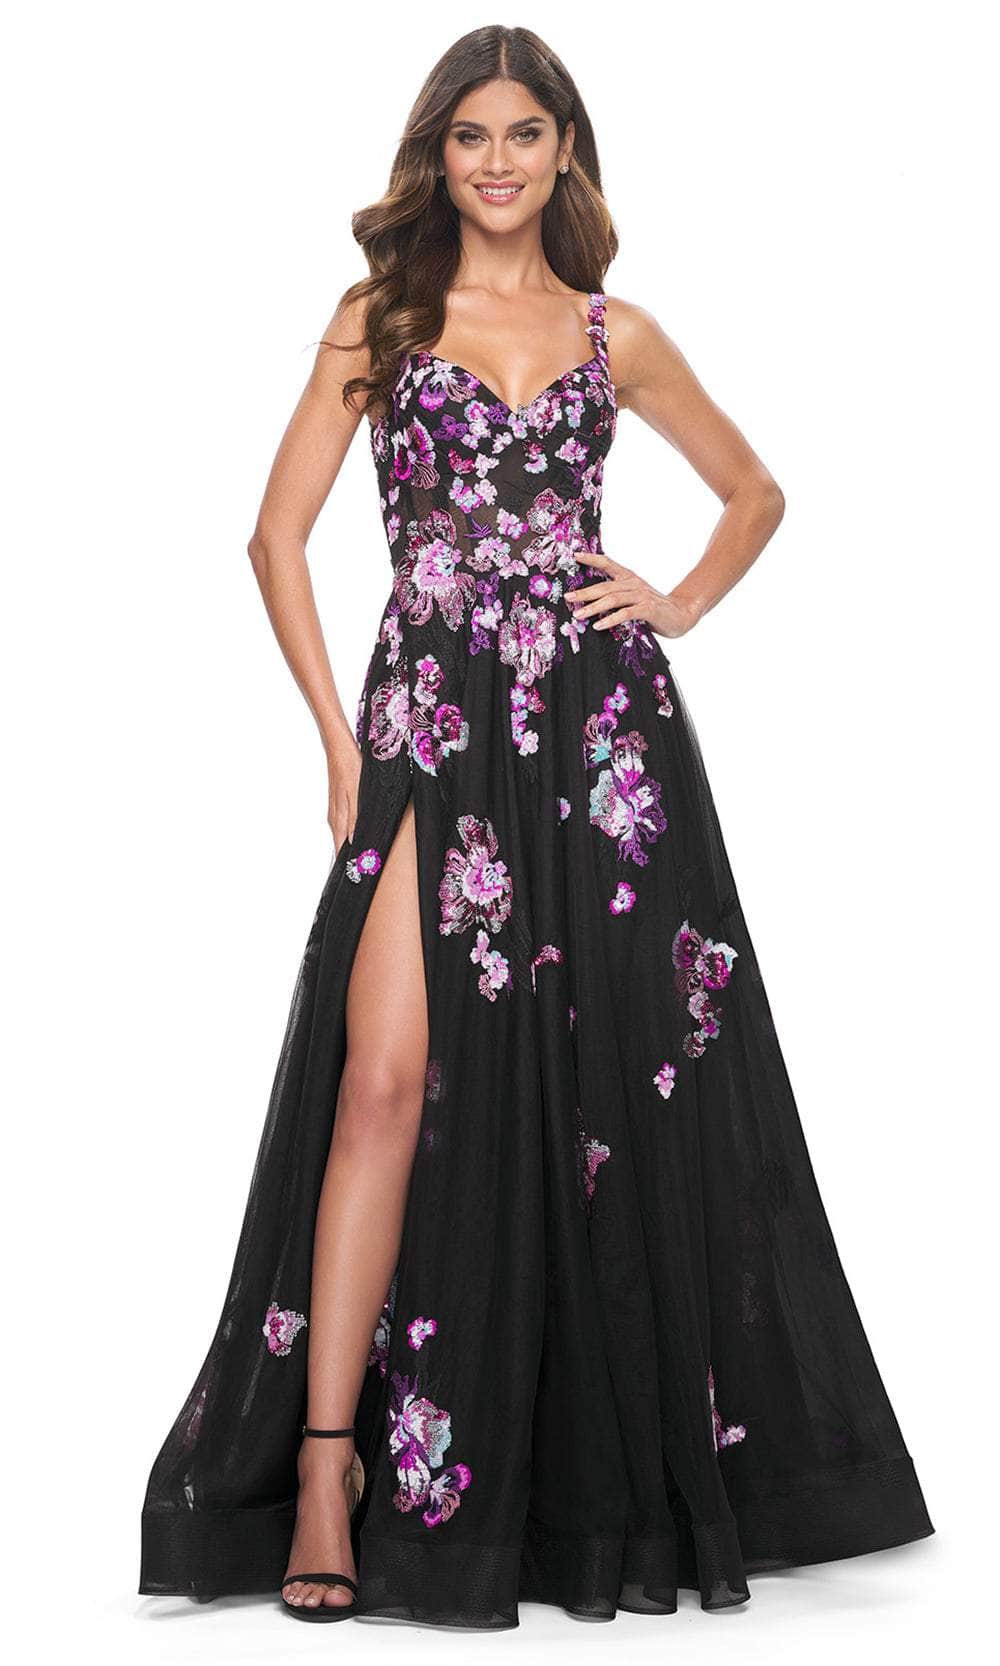 La Femme 32030 - Sequin Floral Embroidered A-Line Prom Gown
